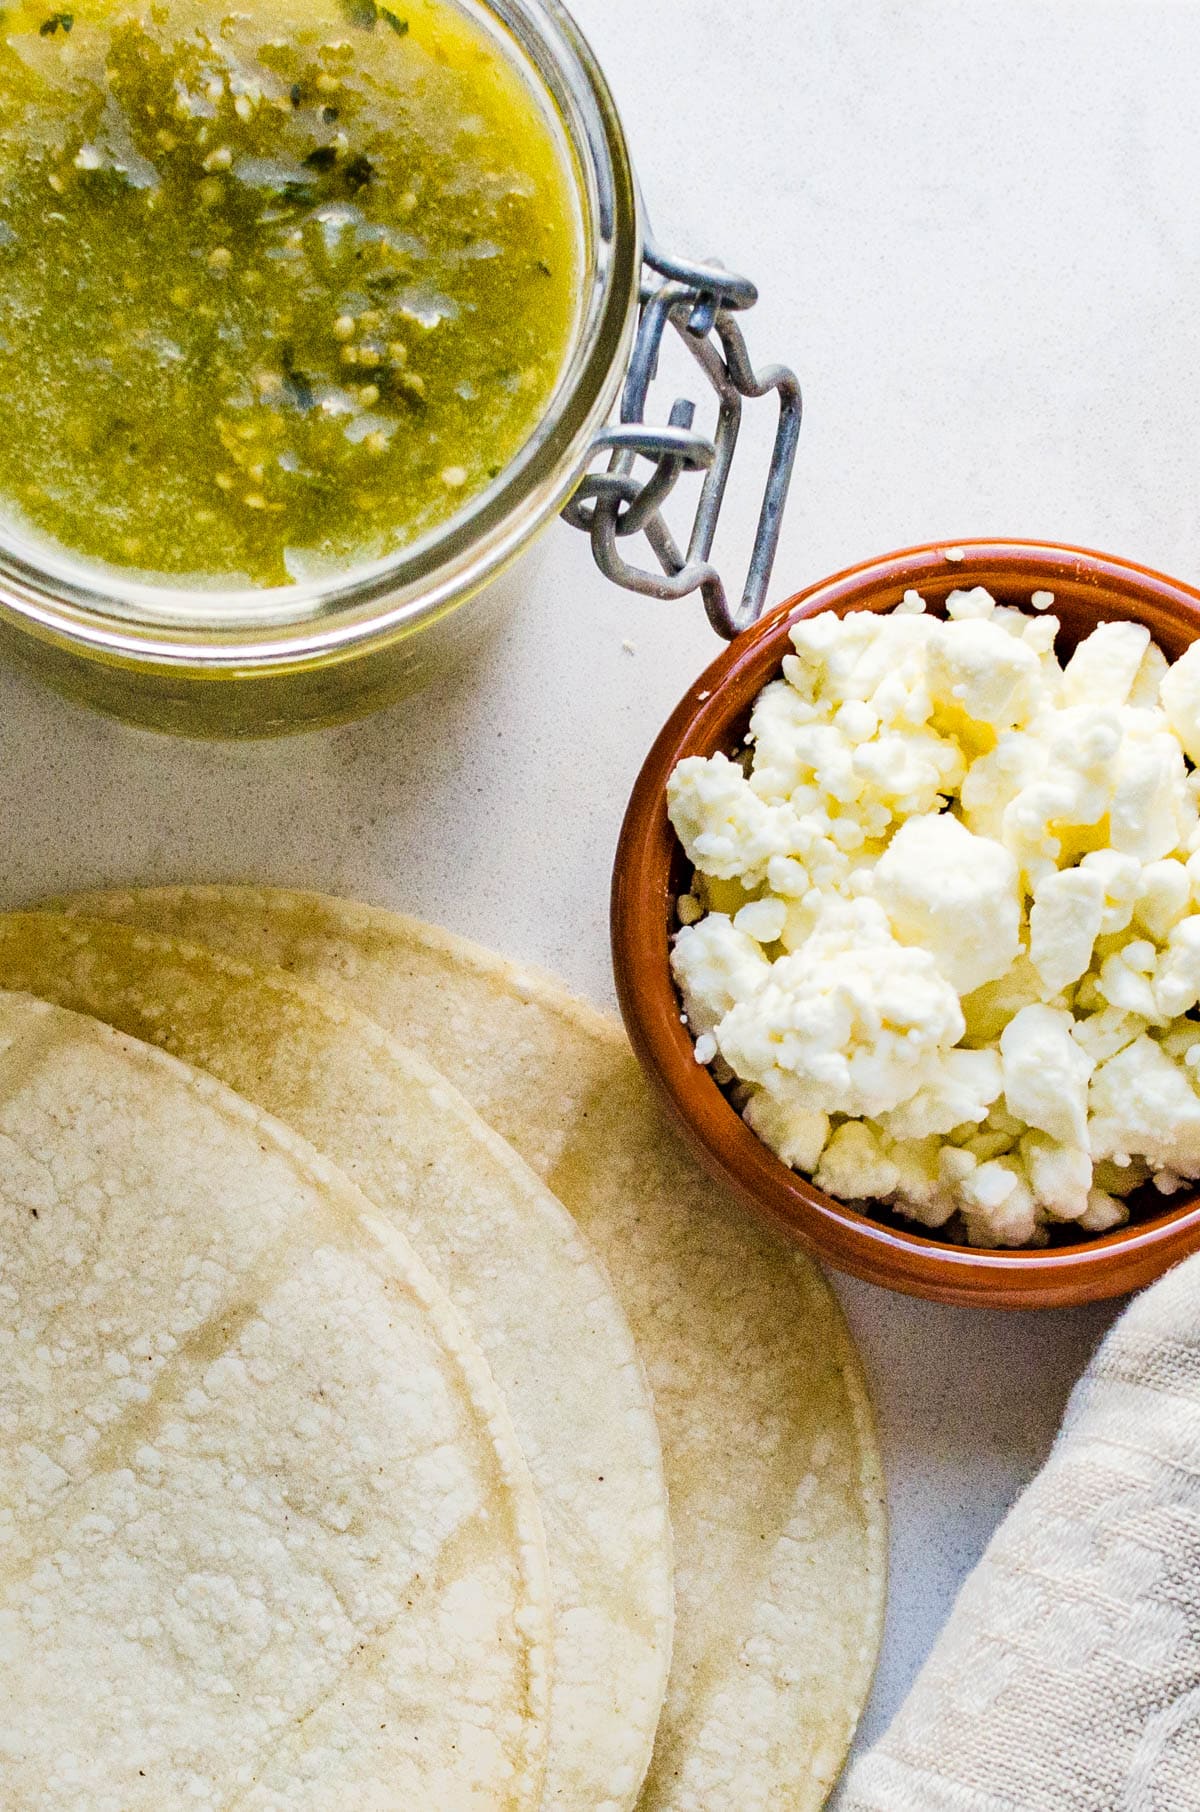 corn tortillas, salsa verde and crumbled cotija cheese for Mexican chalupas recipe.